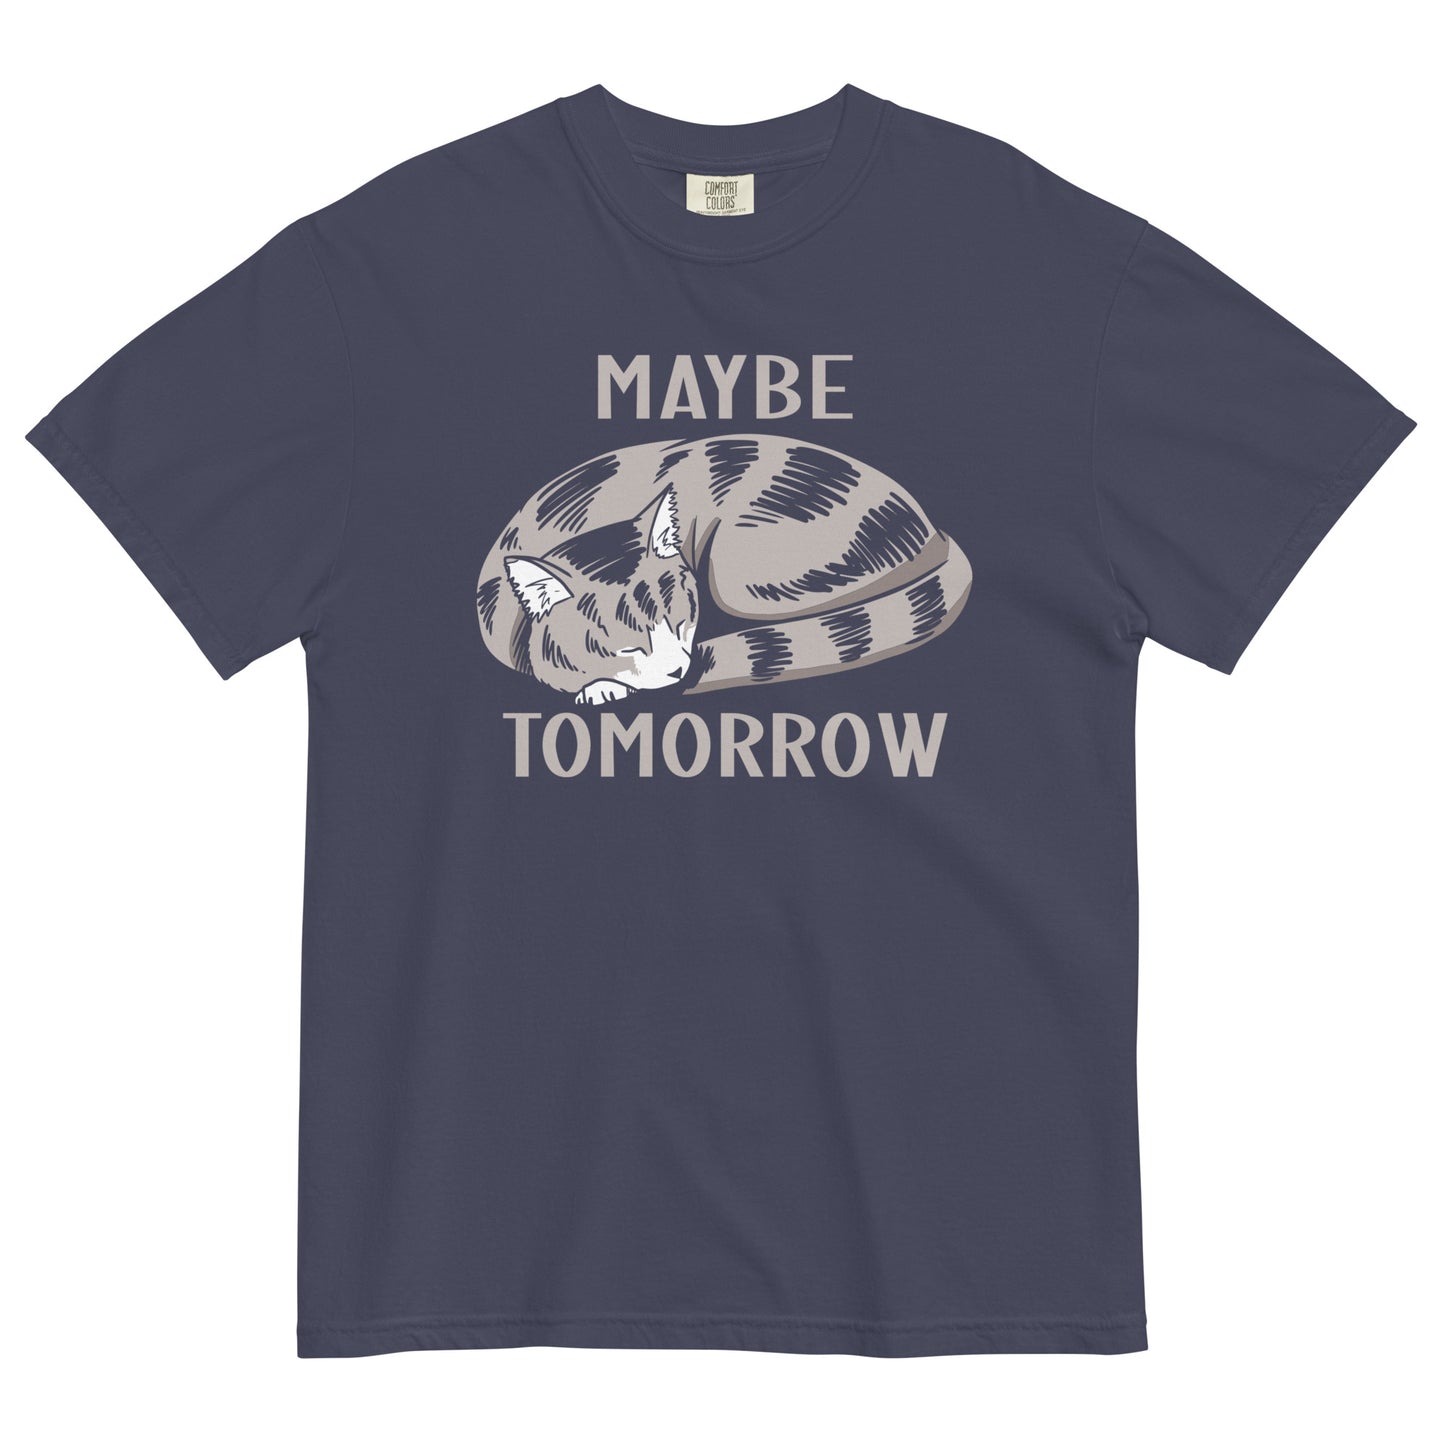 Maybe Tomorrow Men's Relaxed Fit Tee